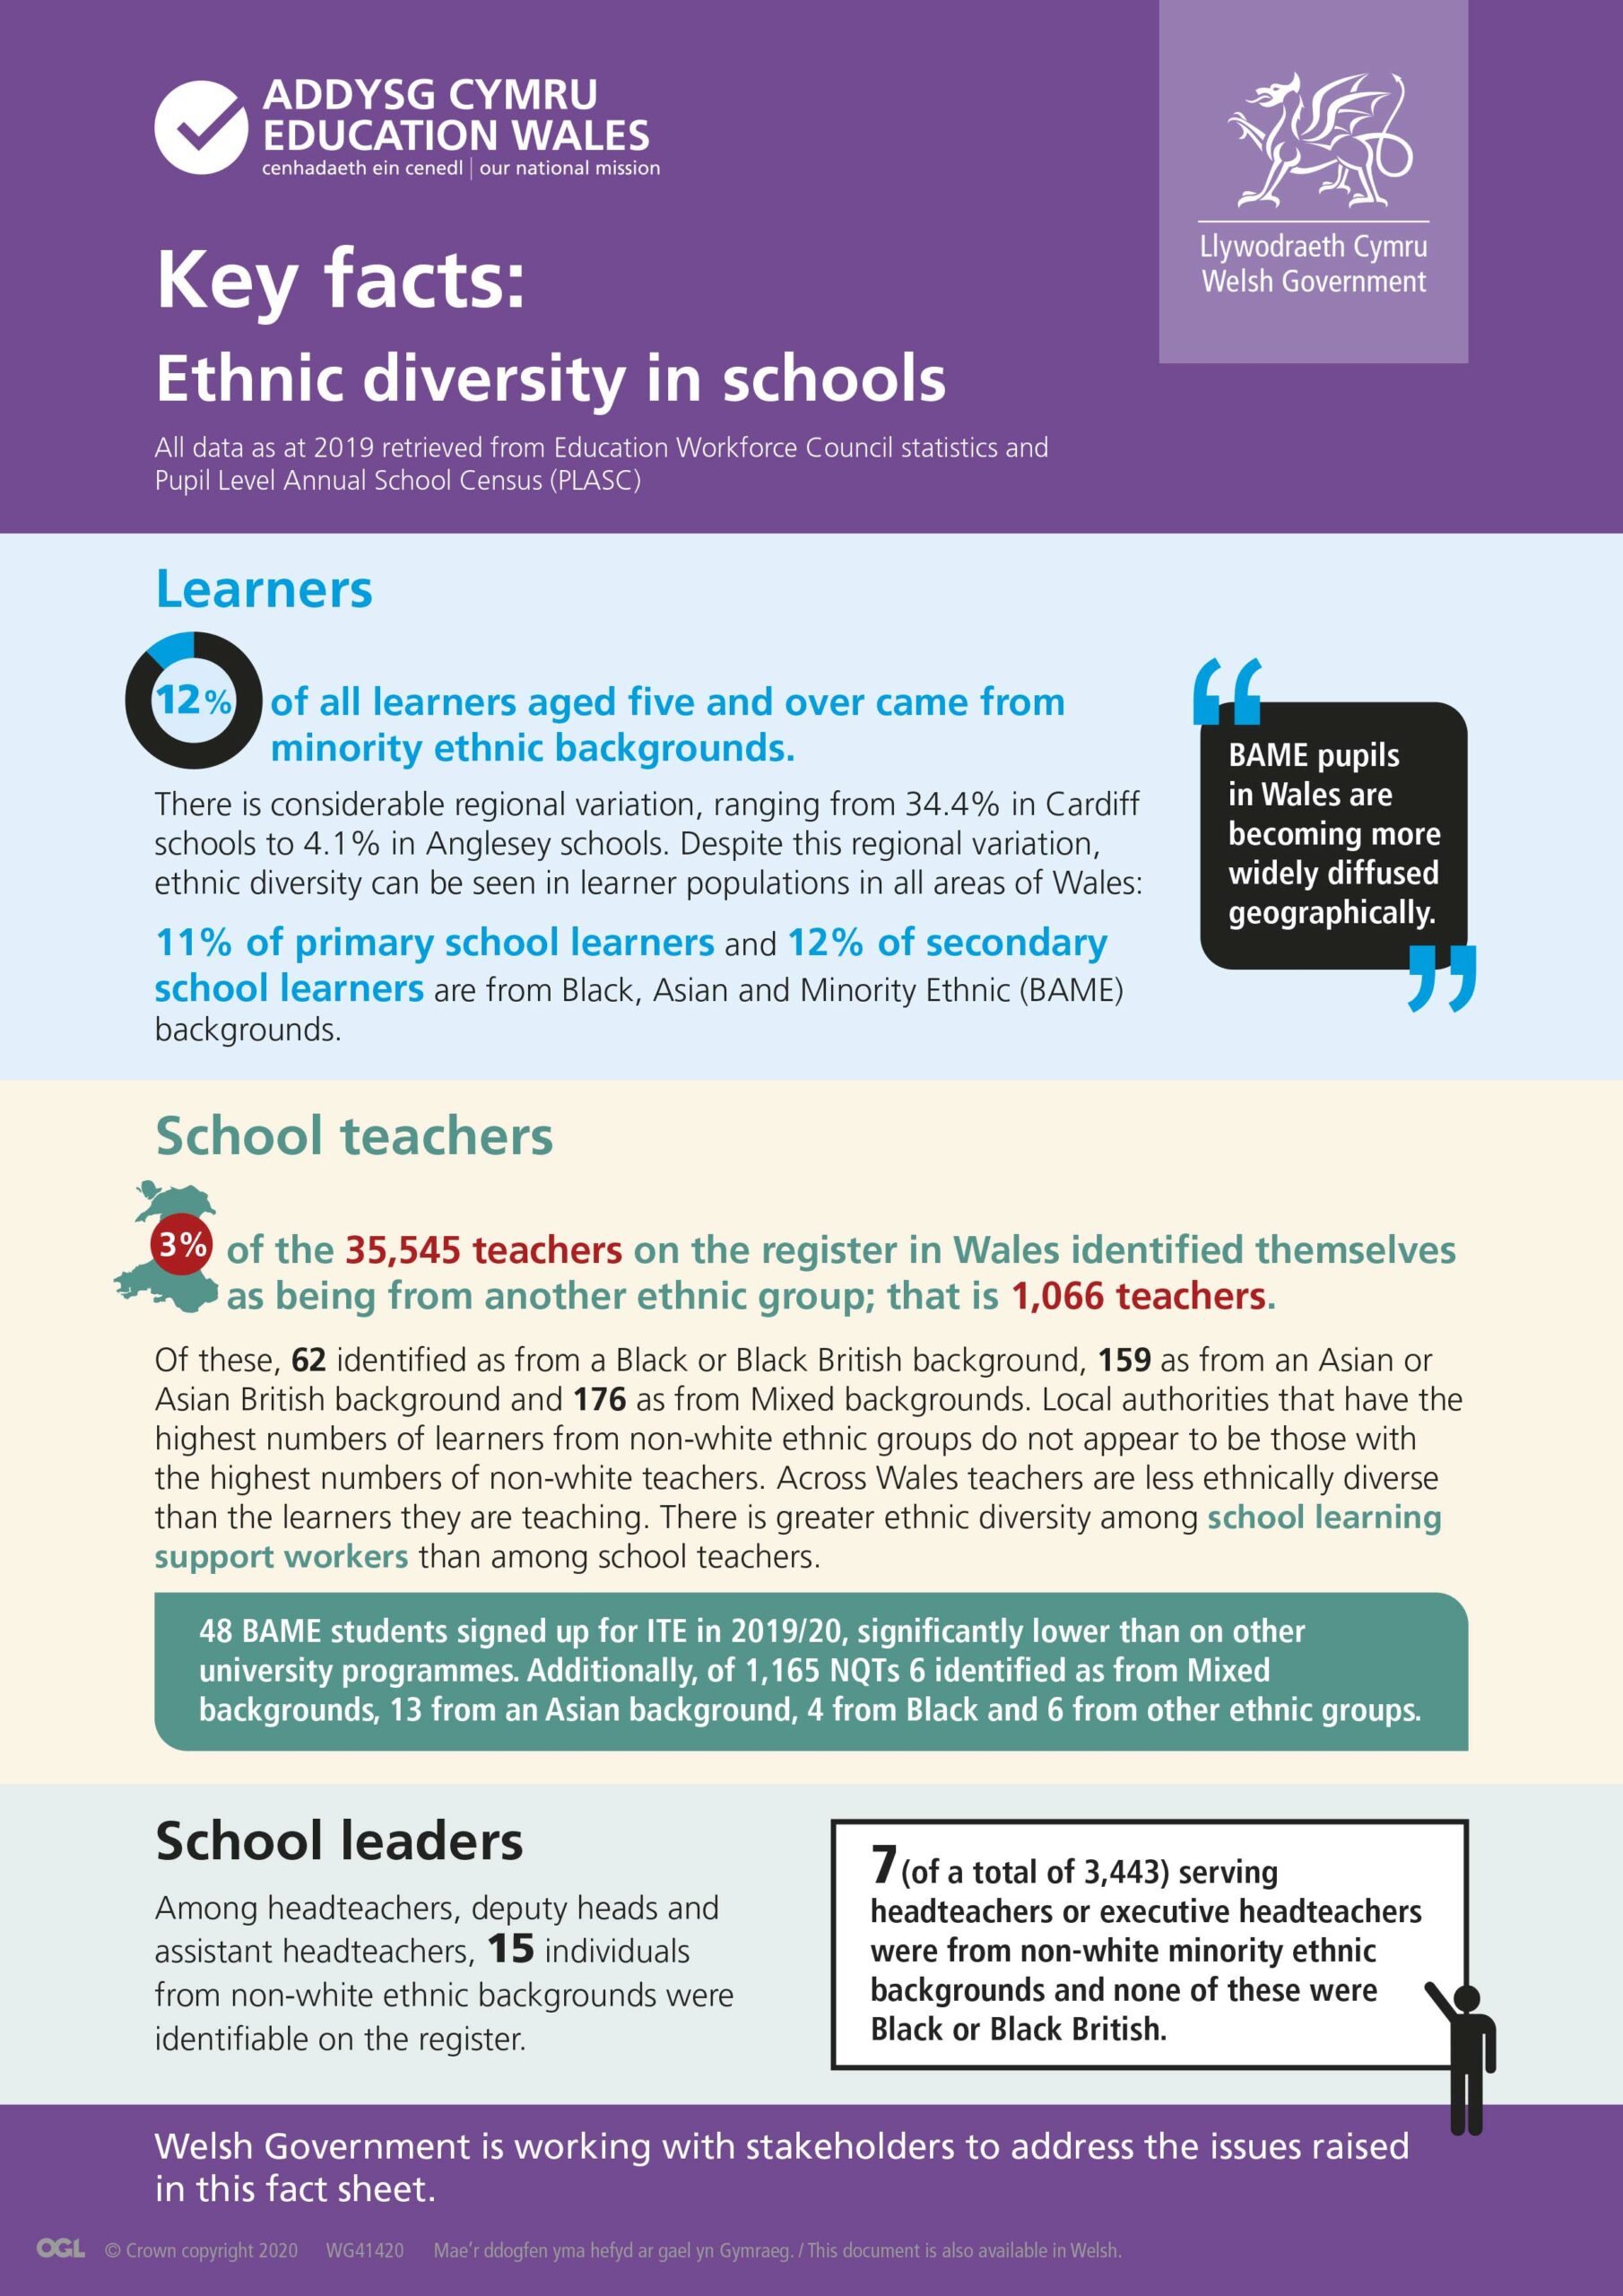 Why is there no ethnic diversity across Wales’ headteachers?